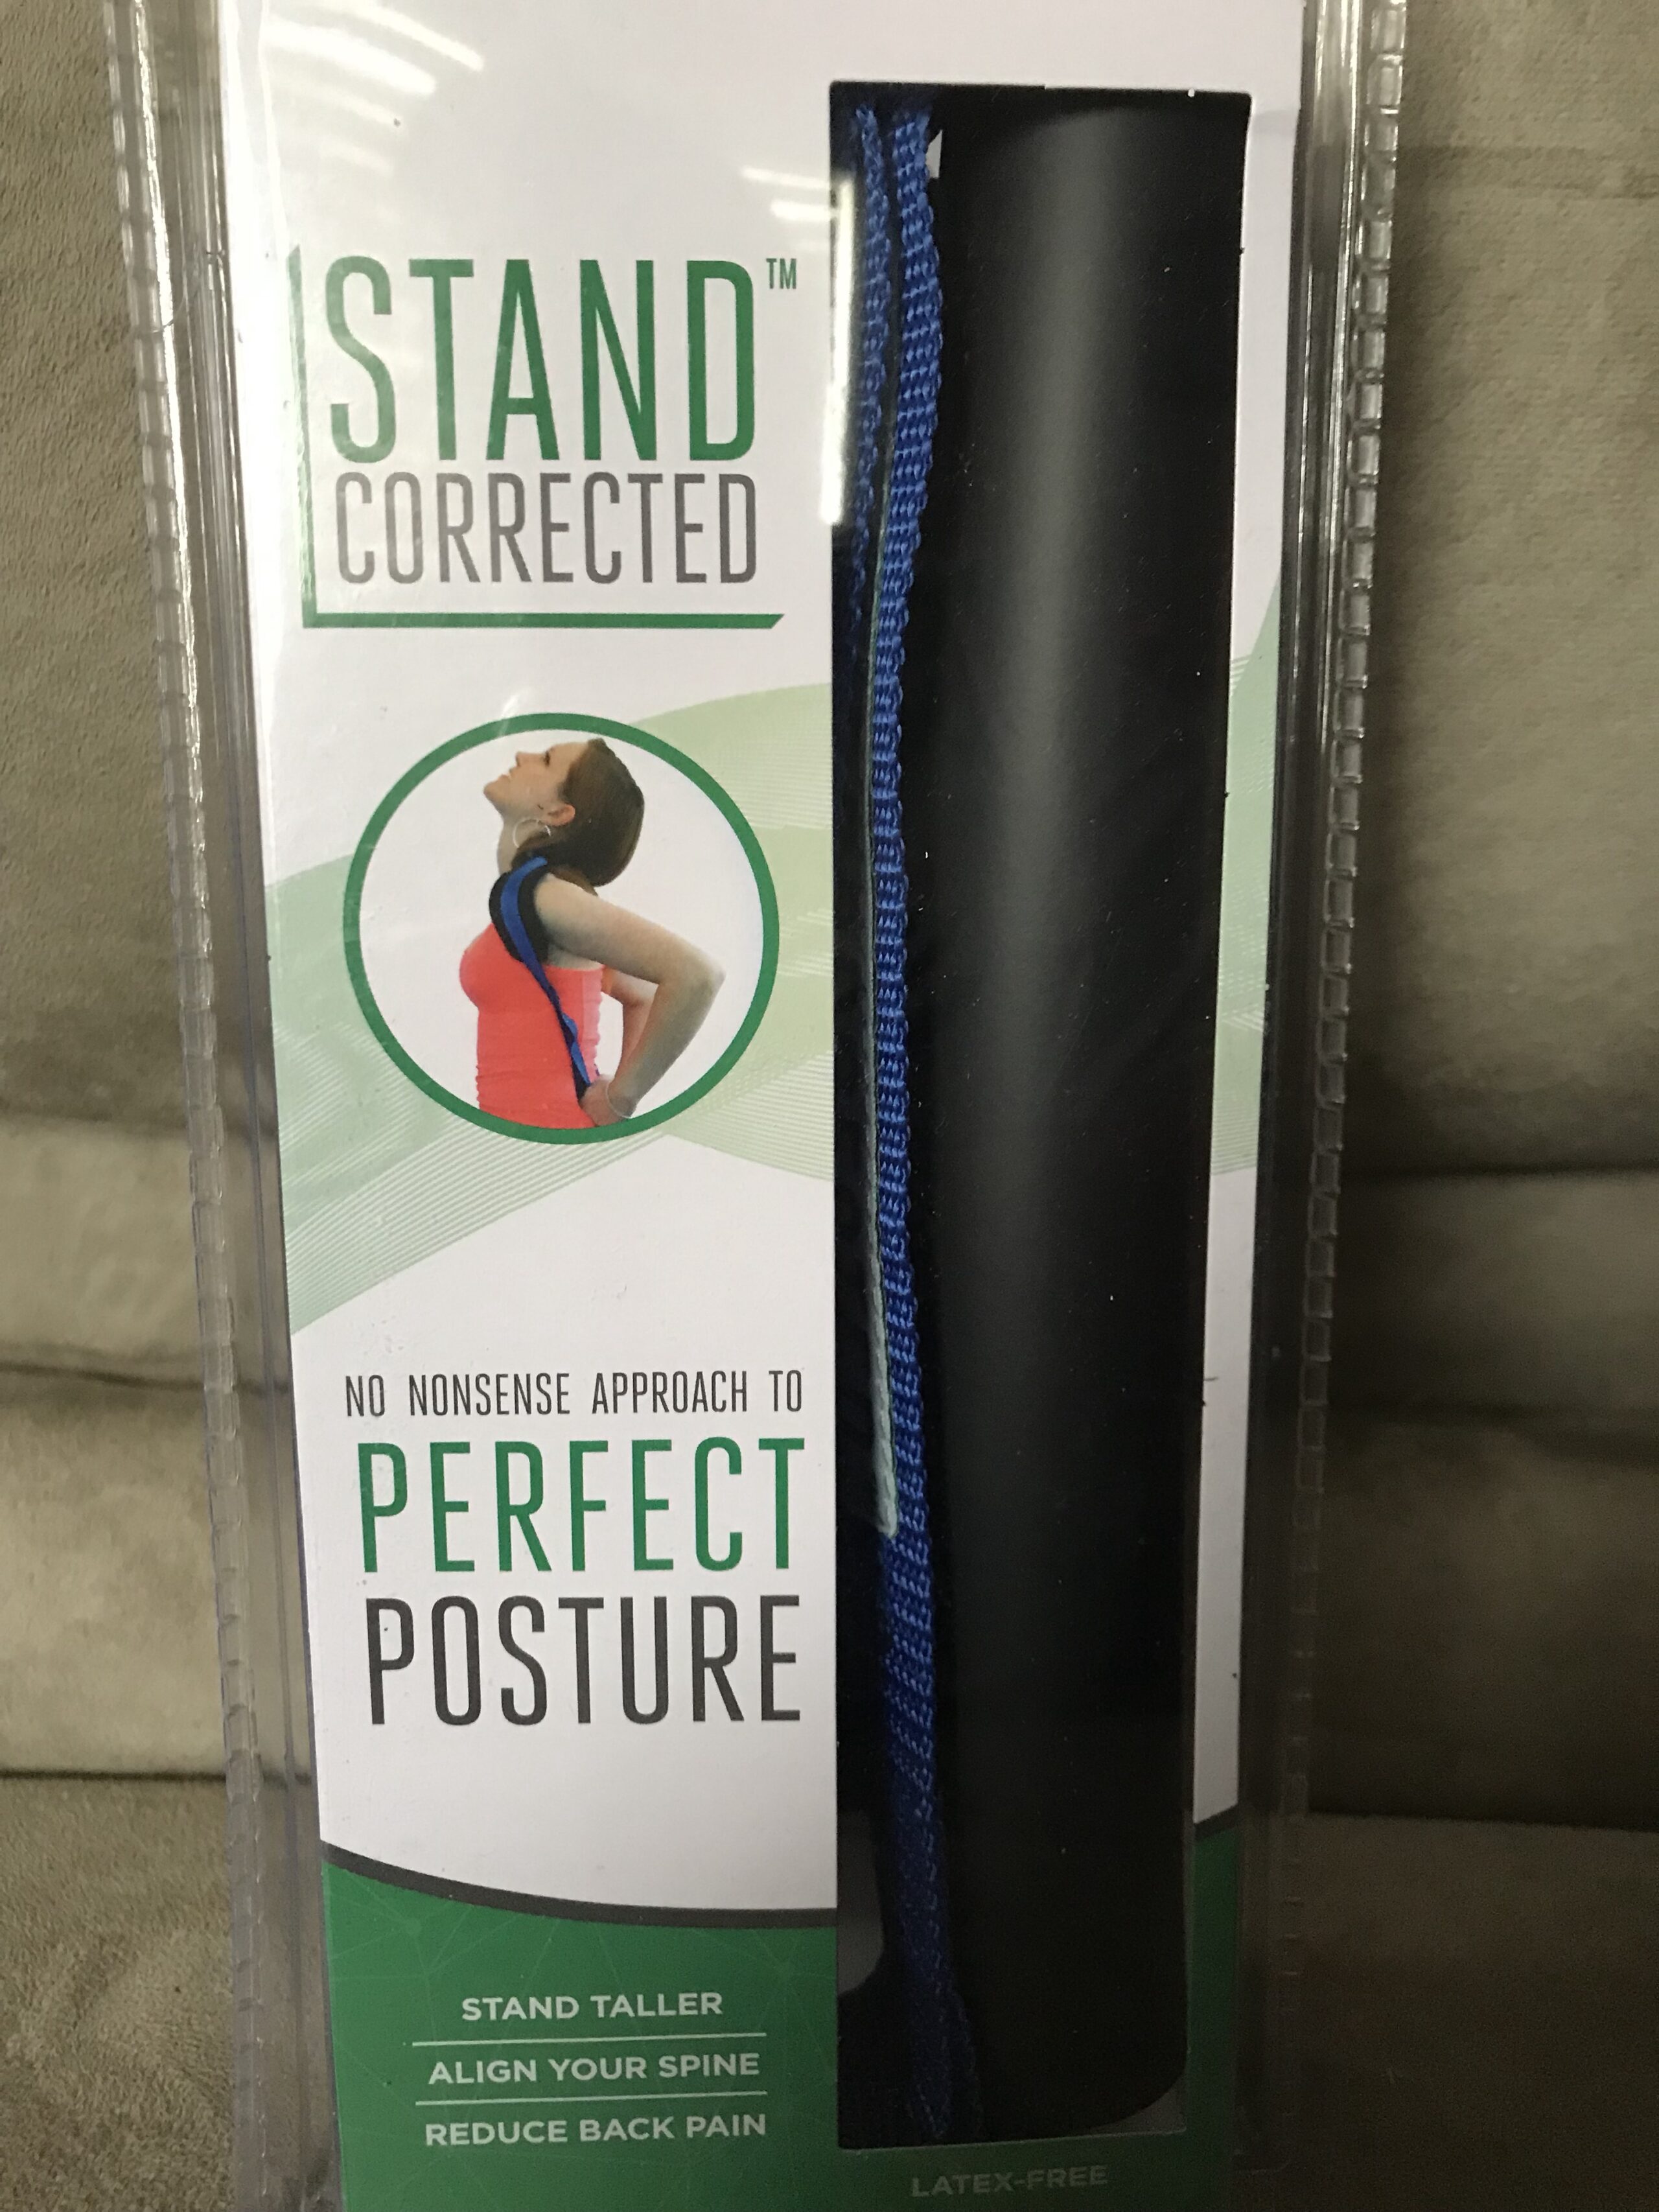 Get Help with Posture with Stand Corrected